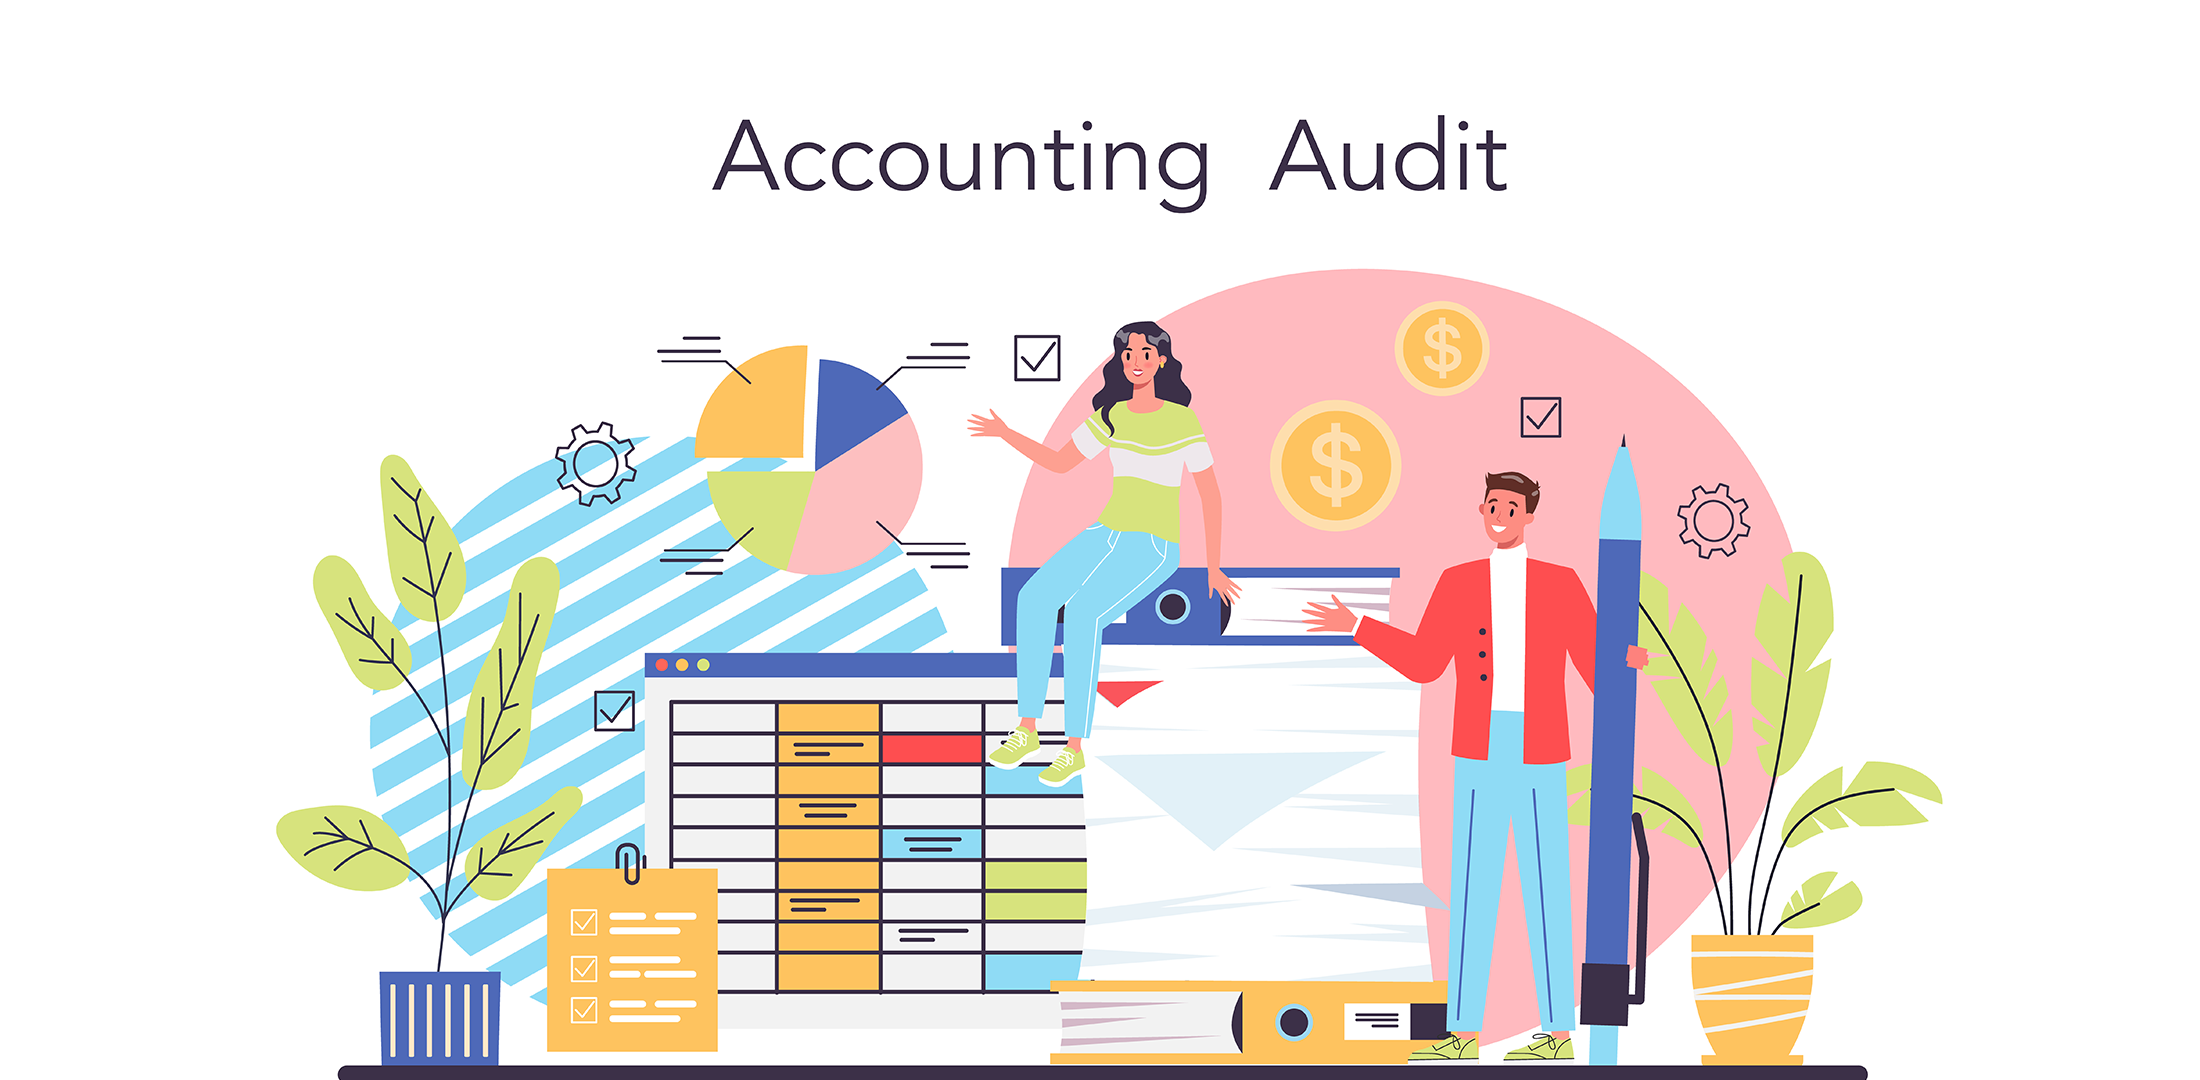 Workforce Planning in Accounting and Auditing Firms